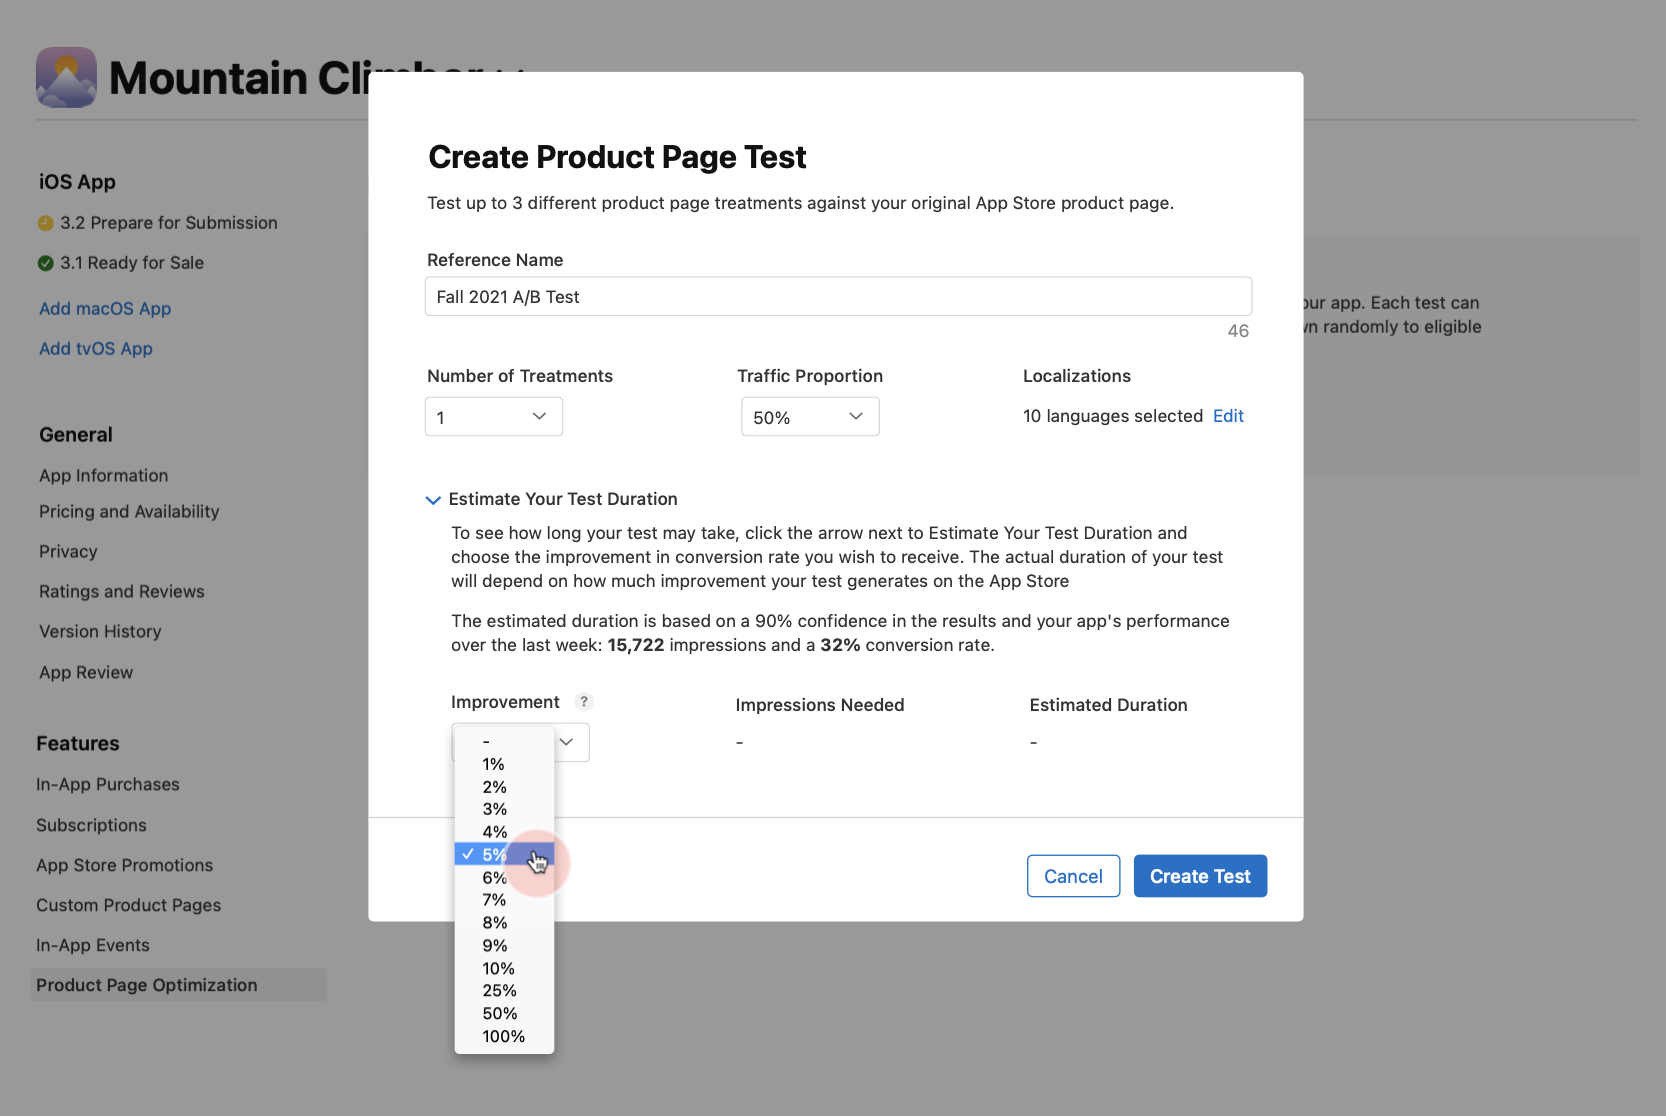 Select the desired performance improvement for your product page test.